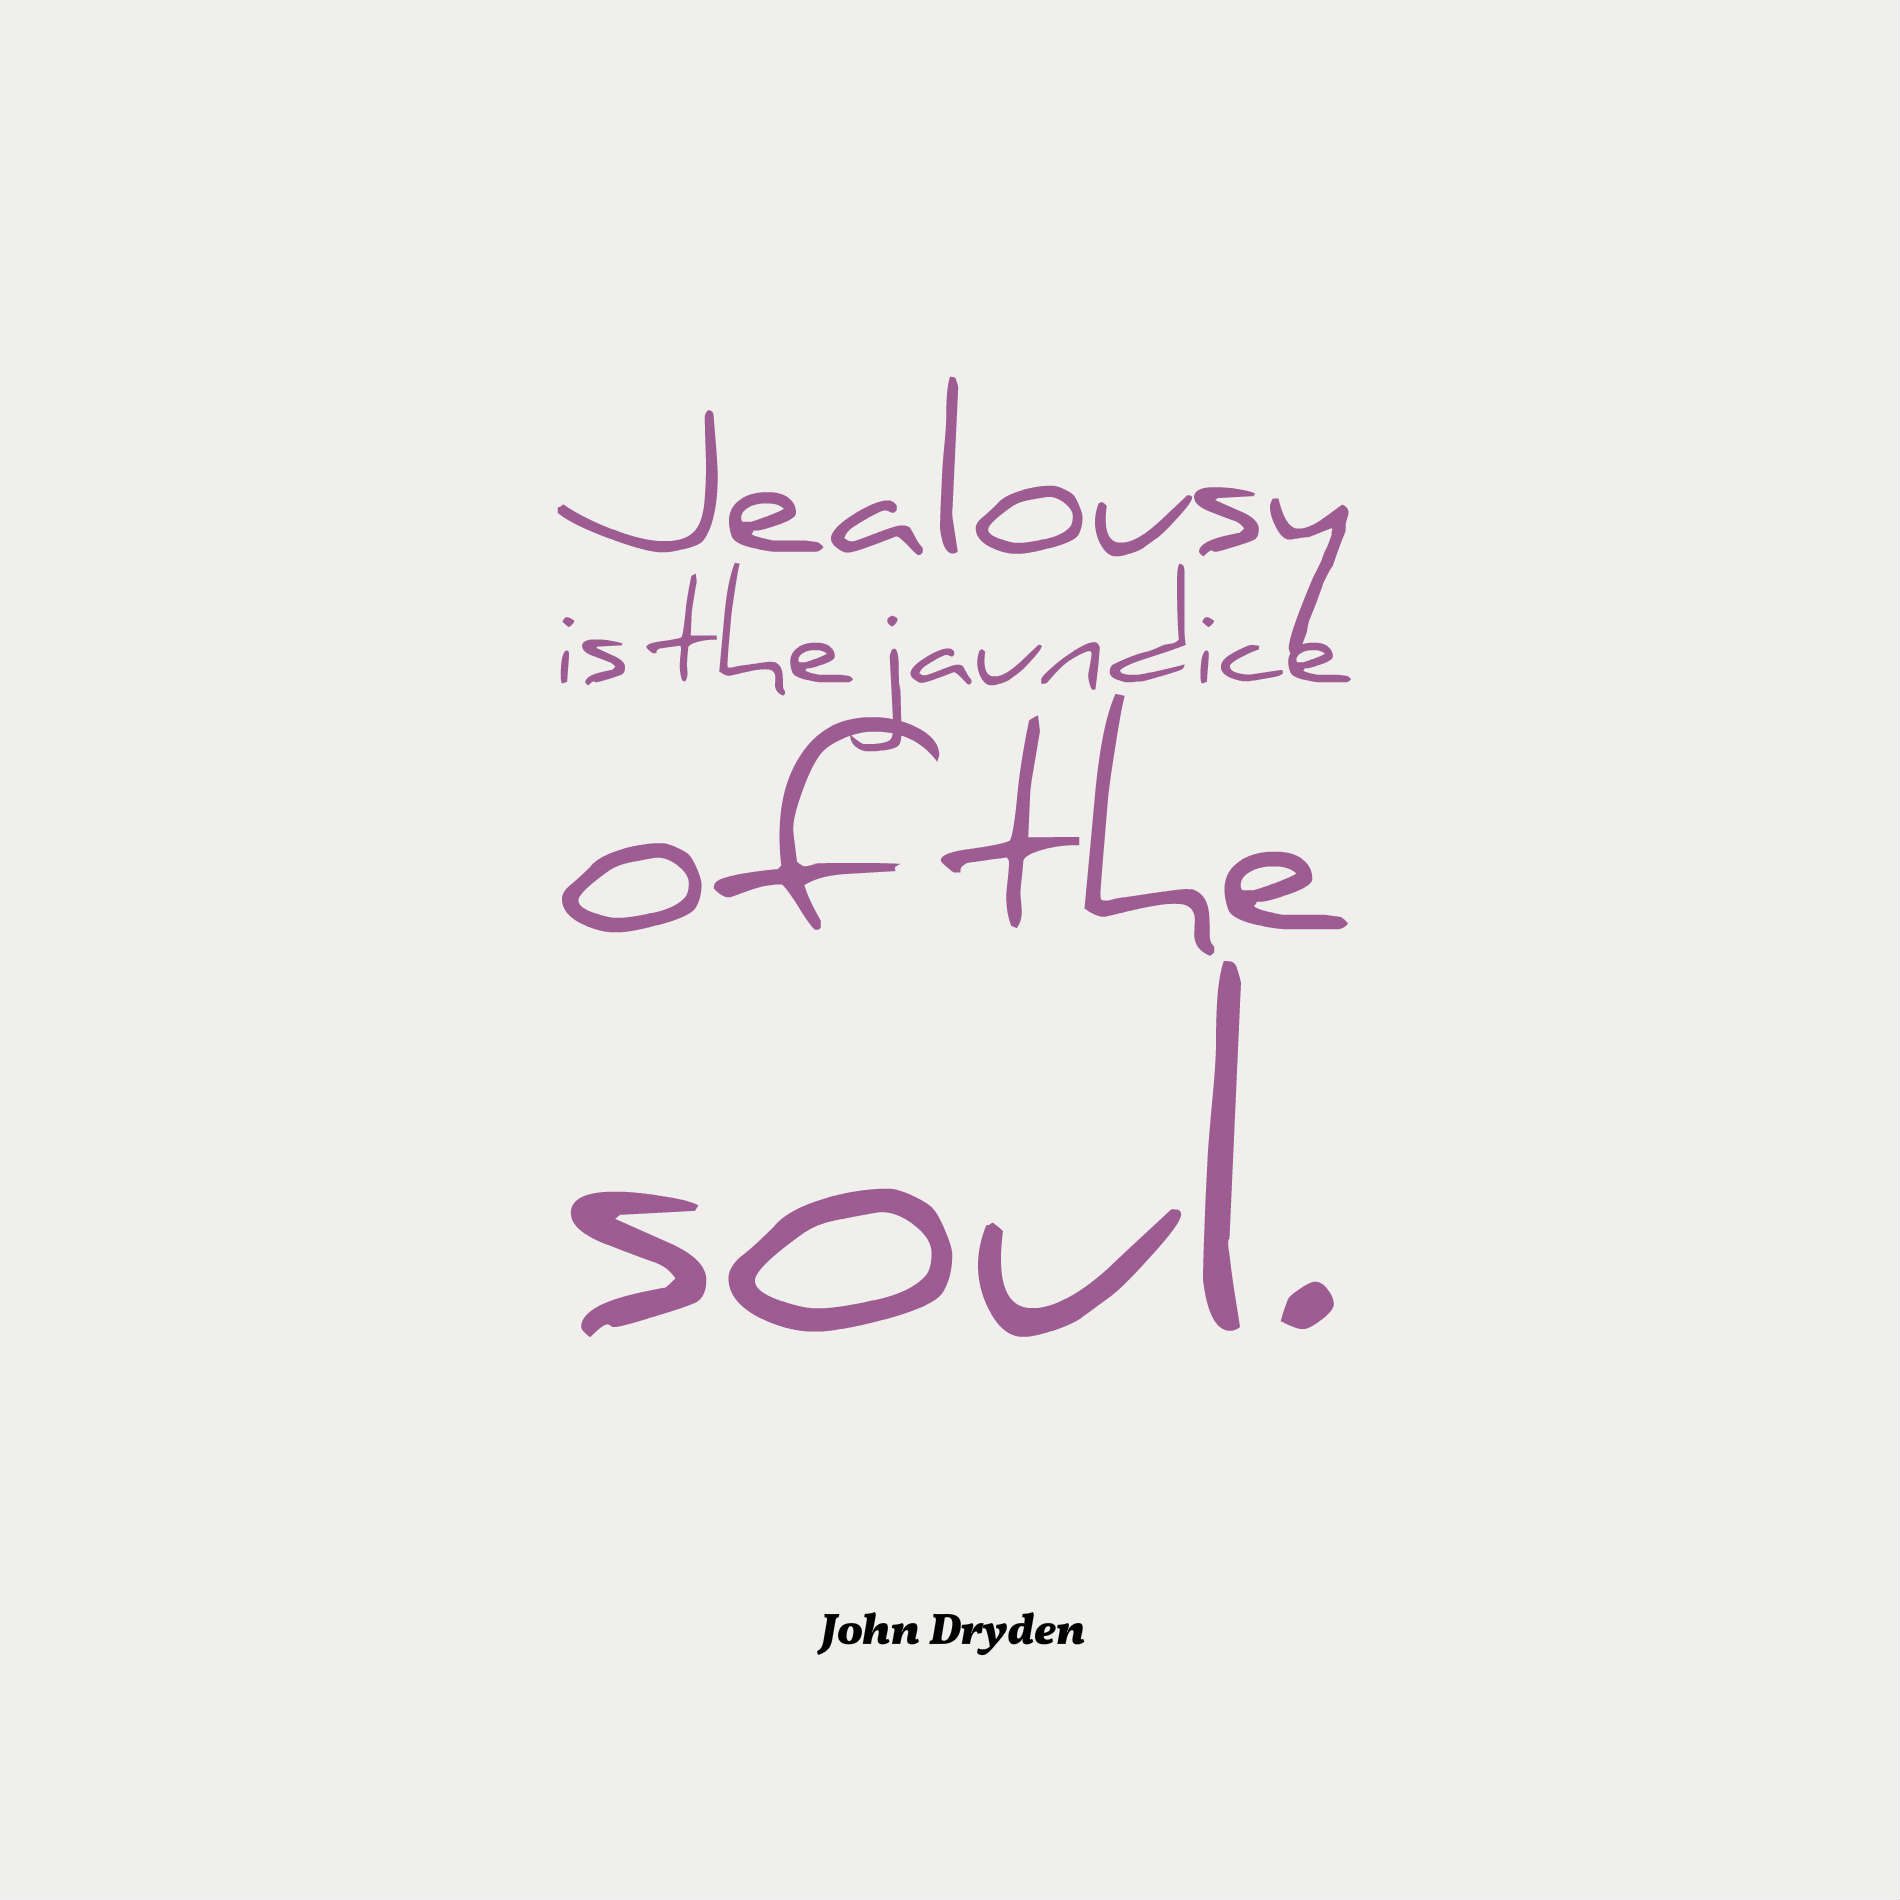 Jealousy is the jaundice of the soul.